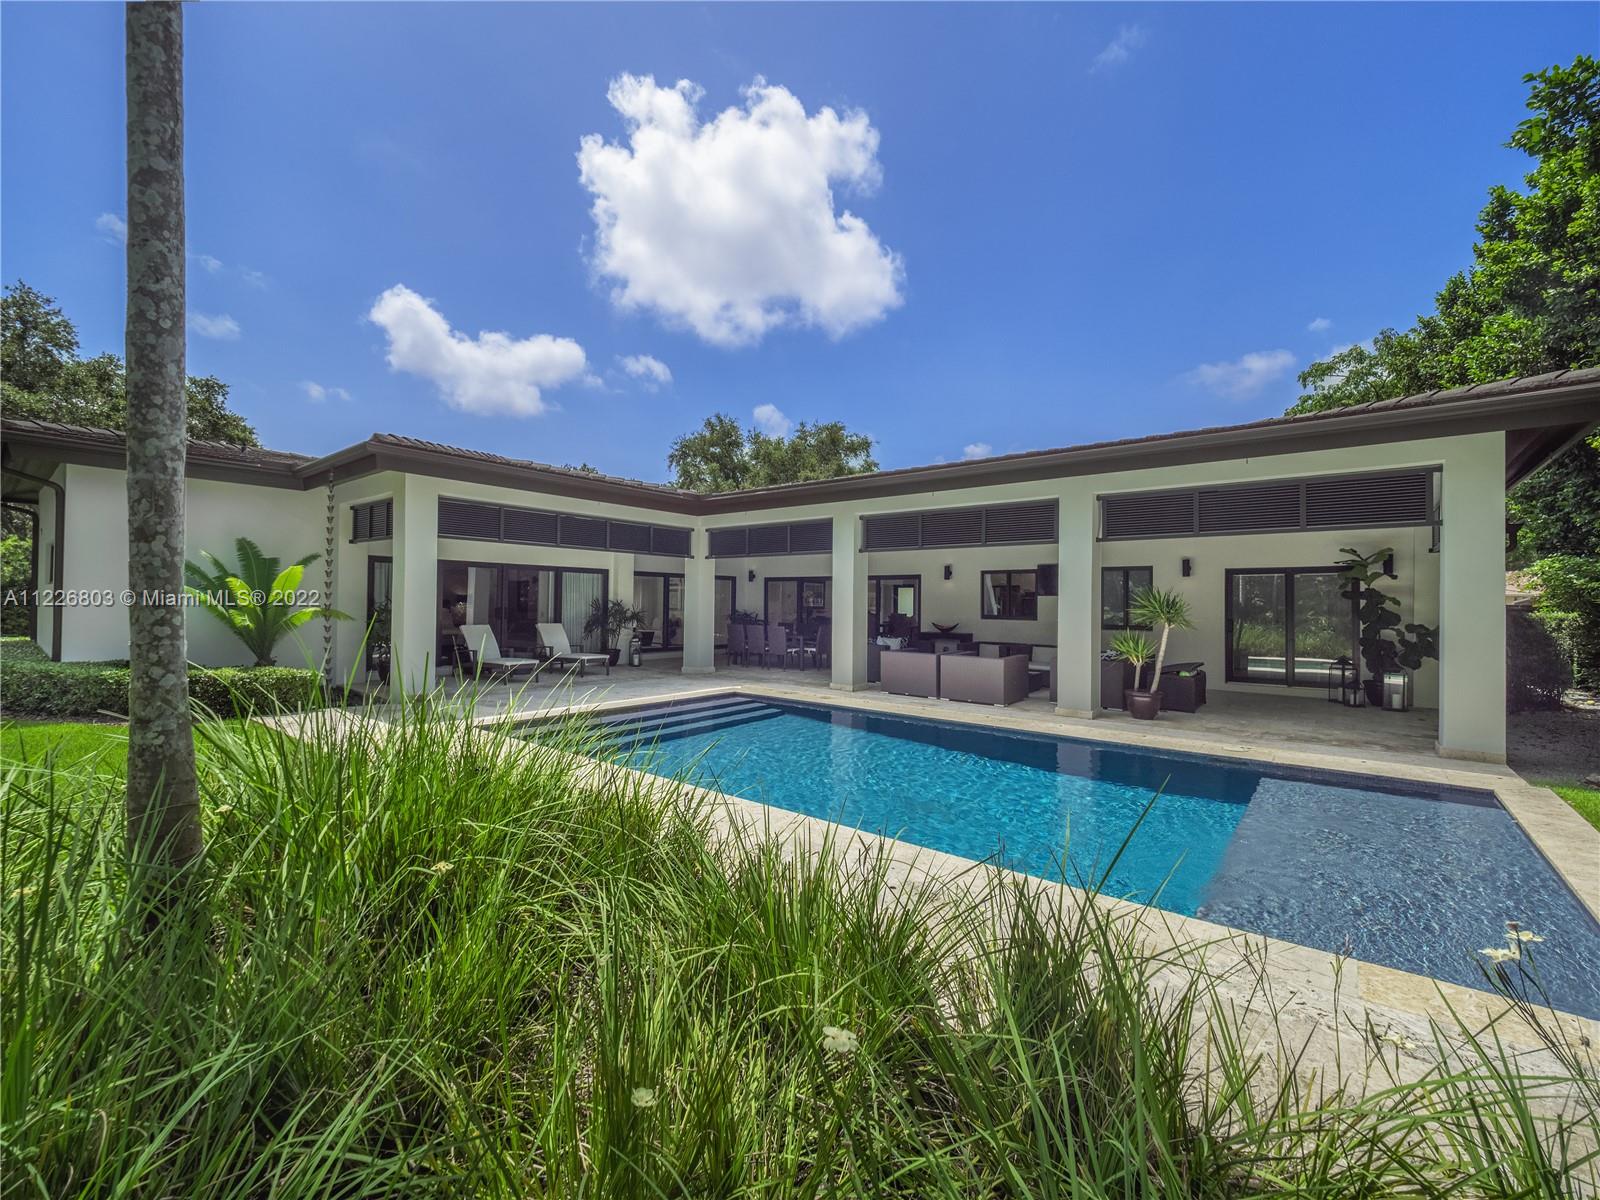 Stunning, move-in ready 5 bed, 3.5 bath home in prime South Miami with perfect split floor plan, incl. 2-car garage & +1,200sf of covered outdoor terrace space and summer kitchen. Hurricane impact doors & windows, 22 kW Generac generator (300gal), pristine porcelain & wood floors, quartz countertops, glass-encased custom wine cellar. Master suite has entertaining room with access to patio, pool and summer kitchen. Massive his & hers walk-in closets and master bath featuring floating vanities. The expansive backyard features 40ft Carpentaria palms, zoysia grass and a variety of native plants & trees. Imported coralina tile & salt water pool.  Mosquito mister system for entire yard & terrace. Substantial addition/remodel was completed in 2013. LIV SF  2,301 - ADJ SF 3,304 – ACTUAL SF 4,087